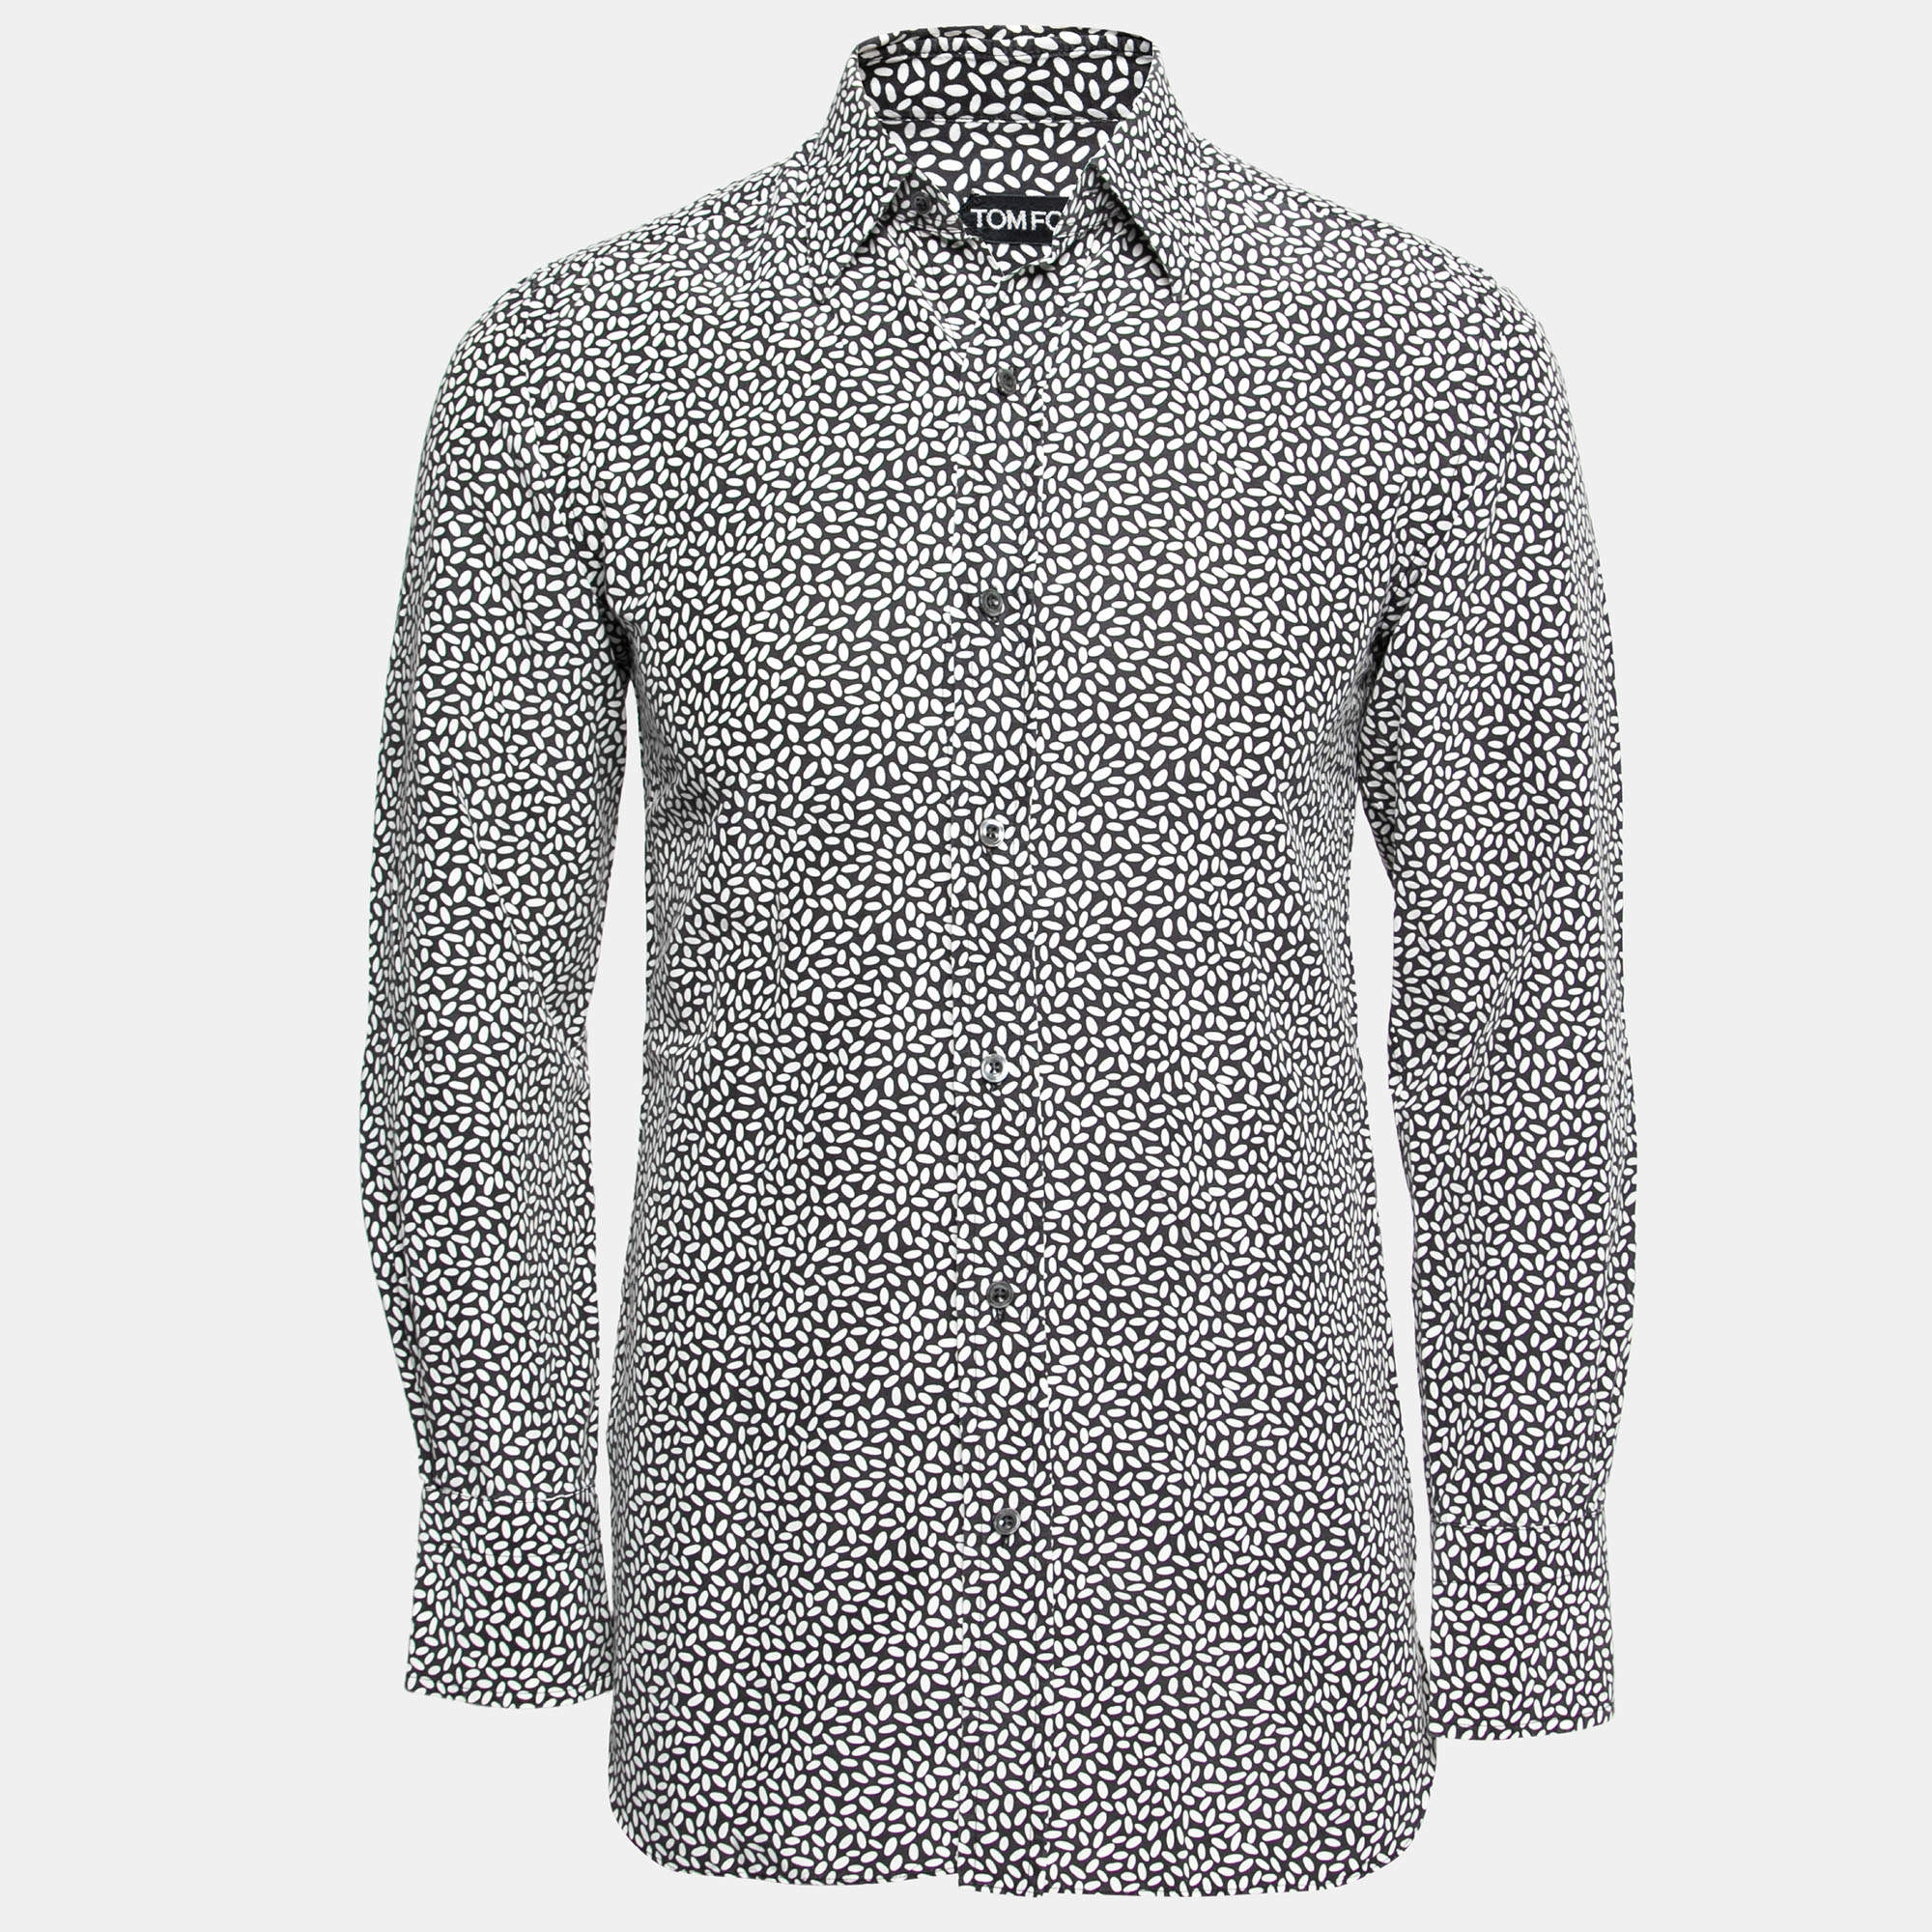 Tom Ford Black and White Printed Cotton Button Front Shirt M Tom Ford ...